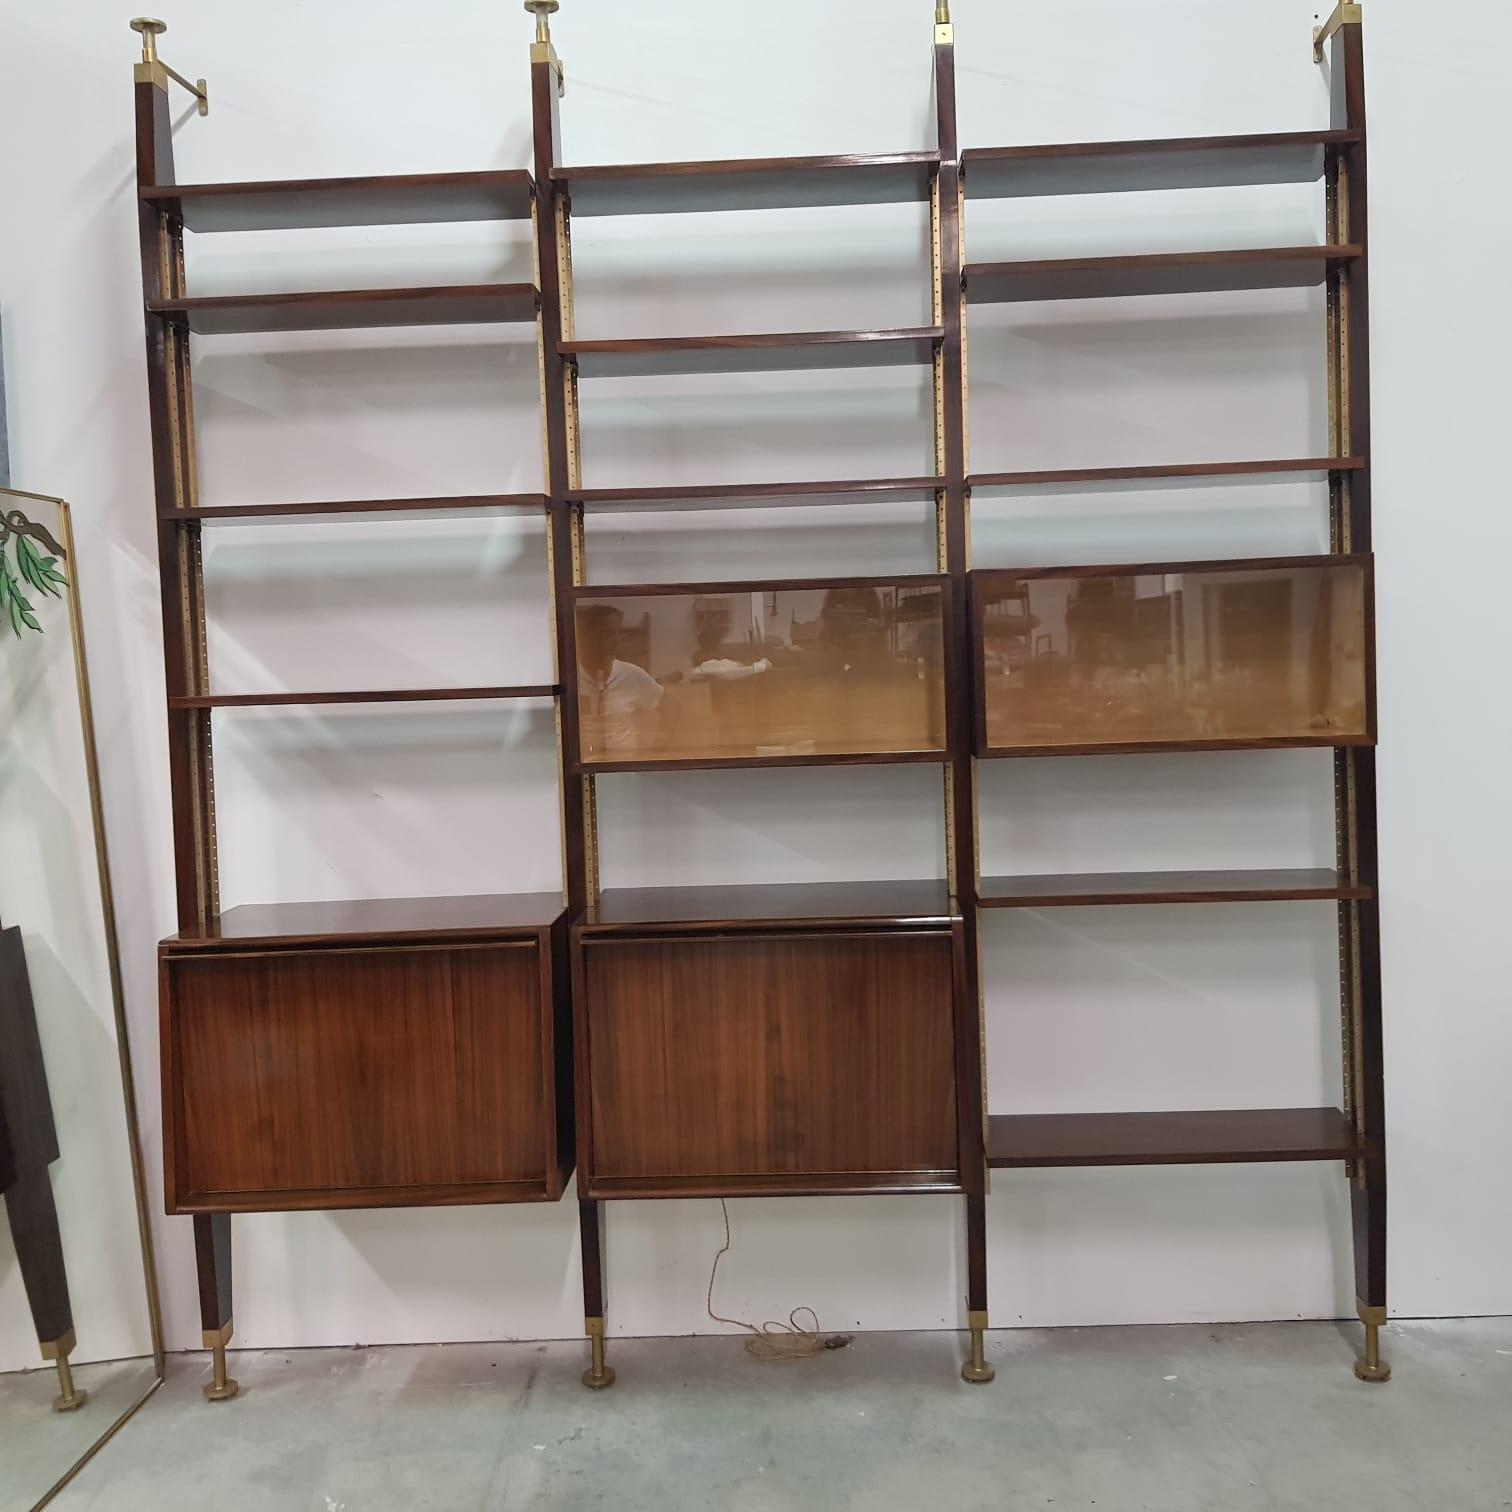 Italian 1960s rosewood bookcase composed by four uprights, shelves and storage cabinets. Brass hardware. Shelves are adjustable in their height. This book case takes inspiration from Albini bookcase since it is based on the floor and fixed to the